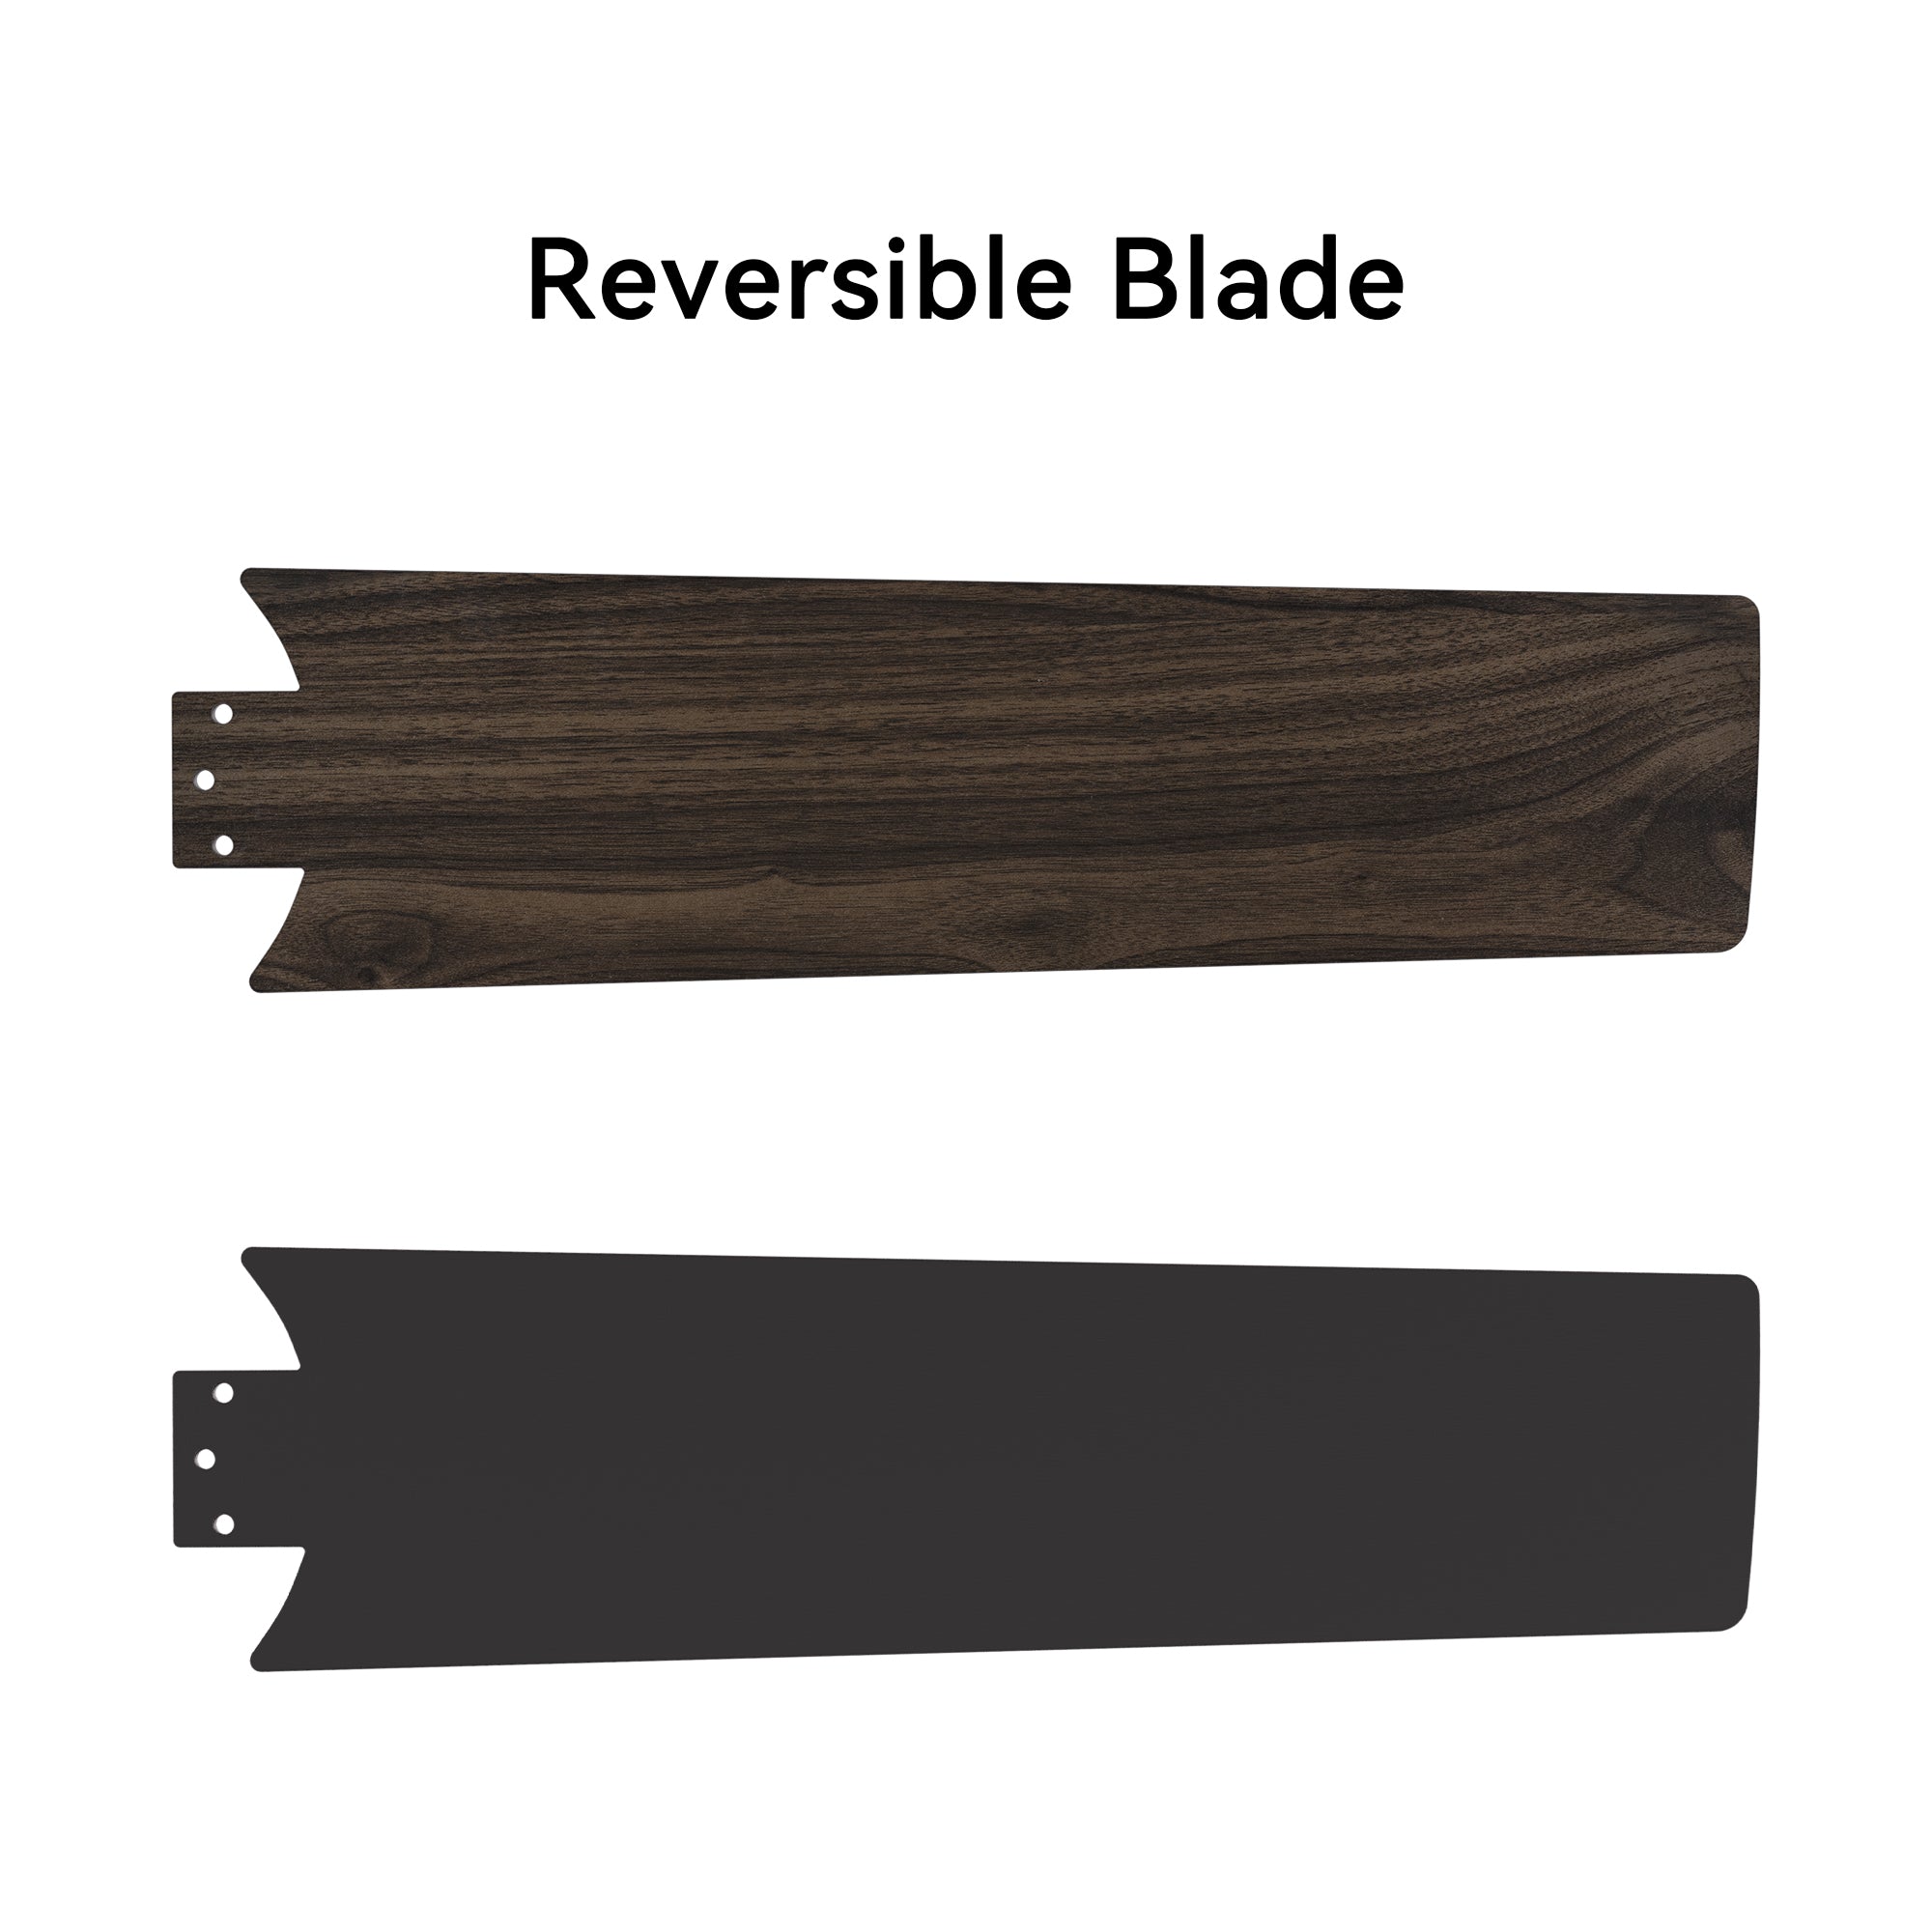 Black downrod ceiling fan with 2 reversible plywood blades, such as  black and dark wood pattern. 